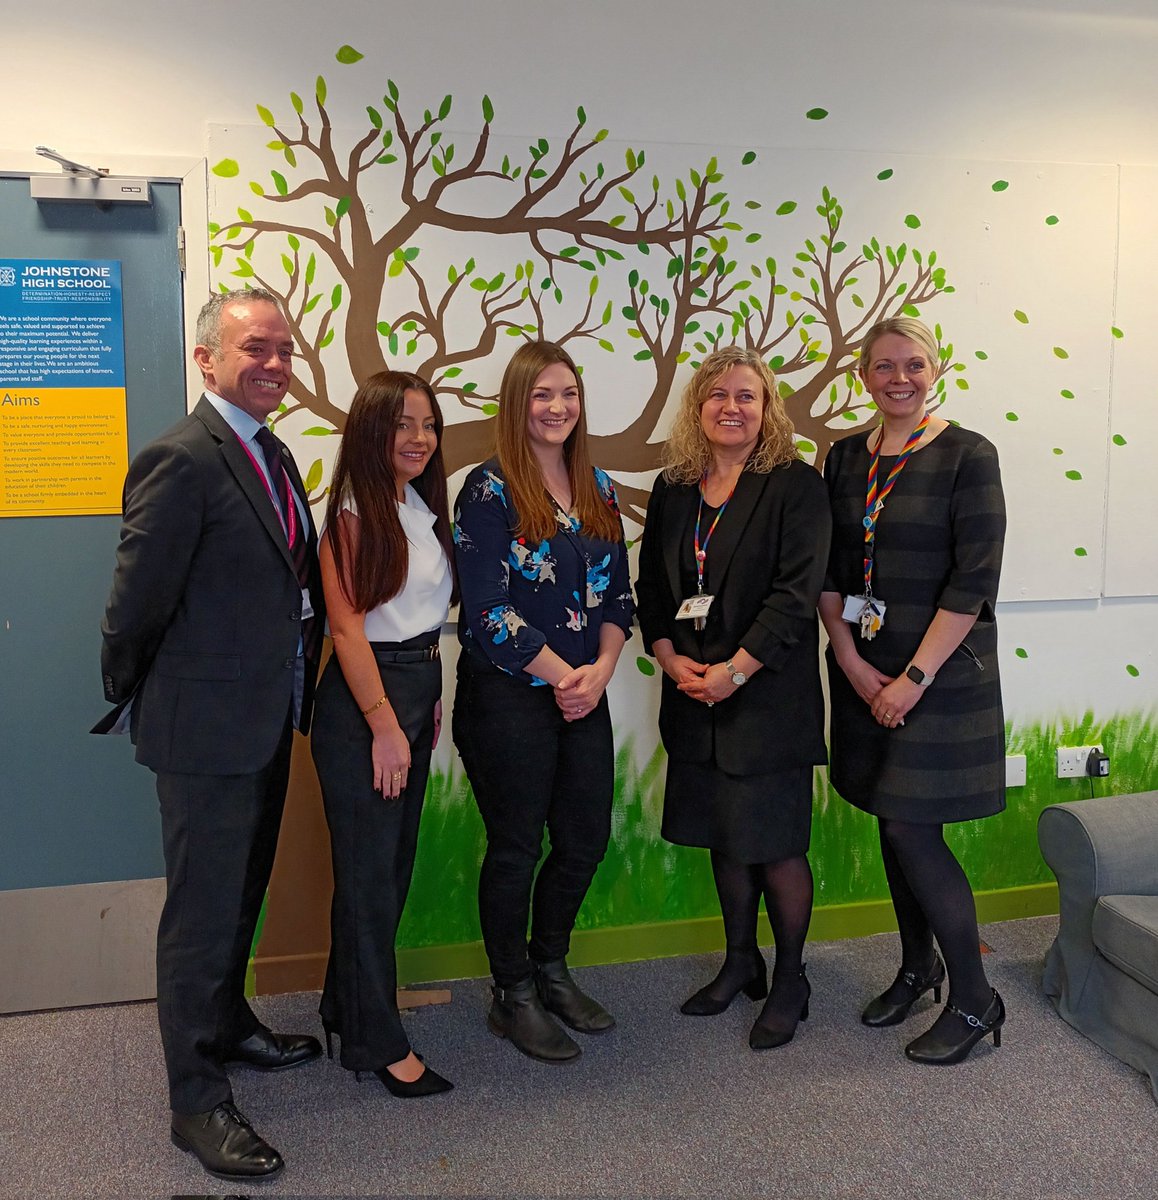 Delighted to be invited to @JohnstoneHighSc to meet with Pupils, Head Teacher, Depute Head Teacher, Principal Teacher The Promise, and @NatalieDon_ to hear about how the school is #KeepIngThePromise